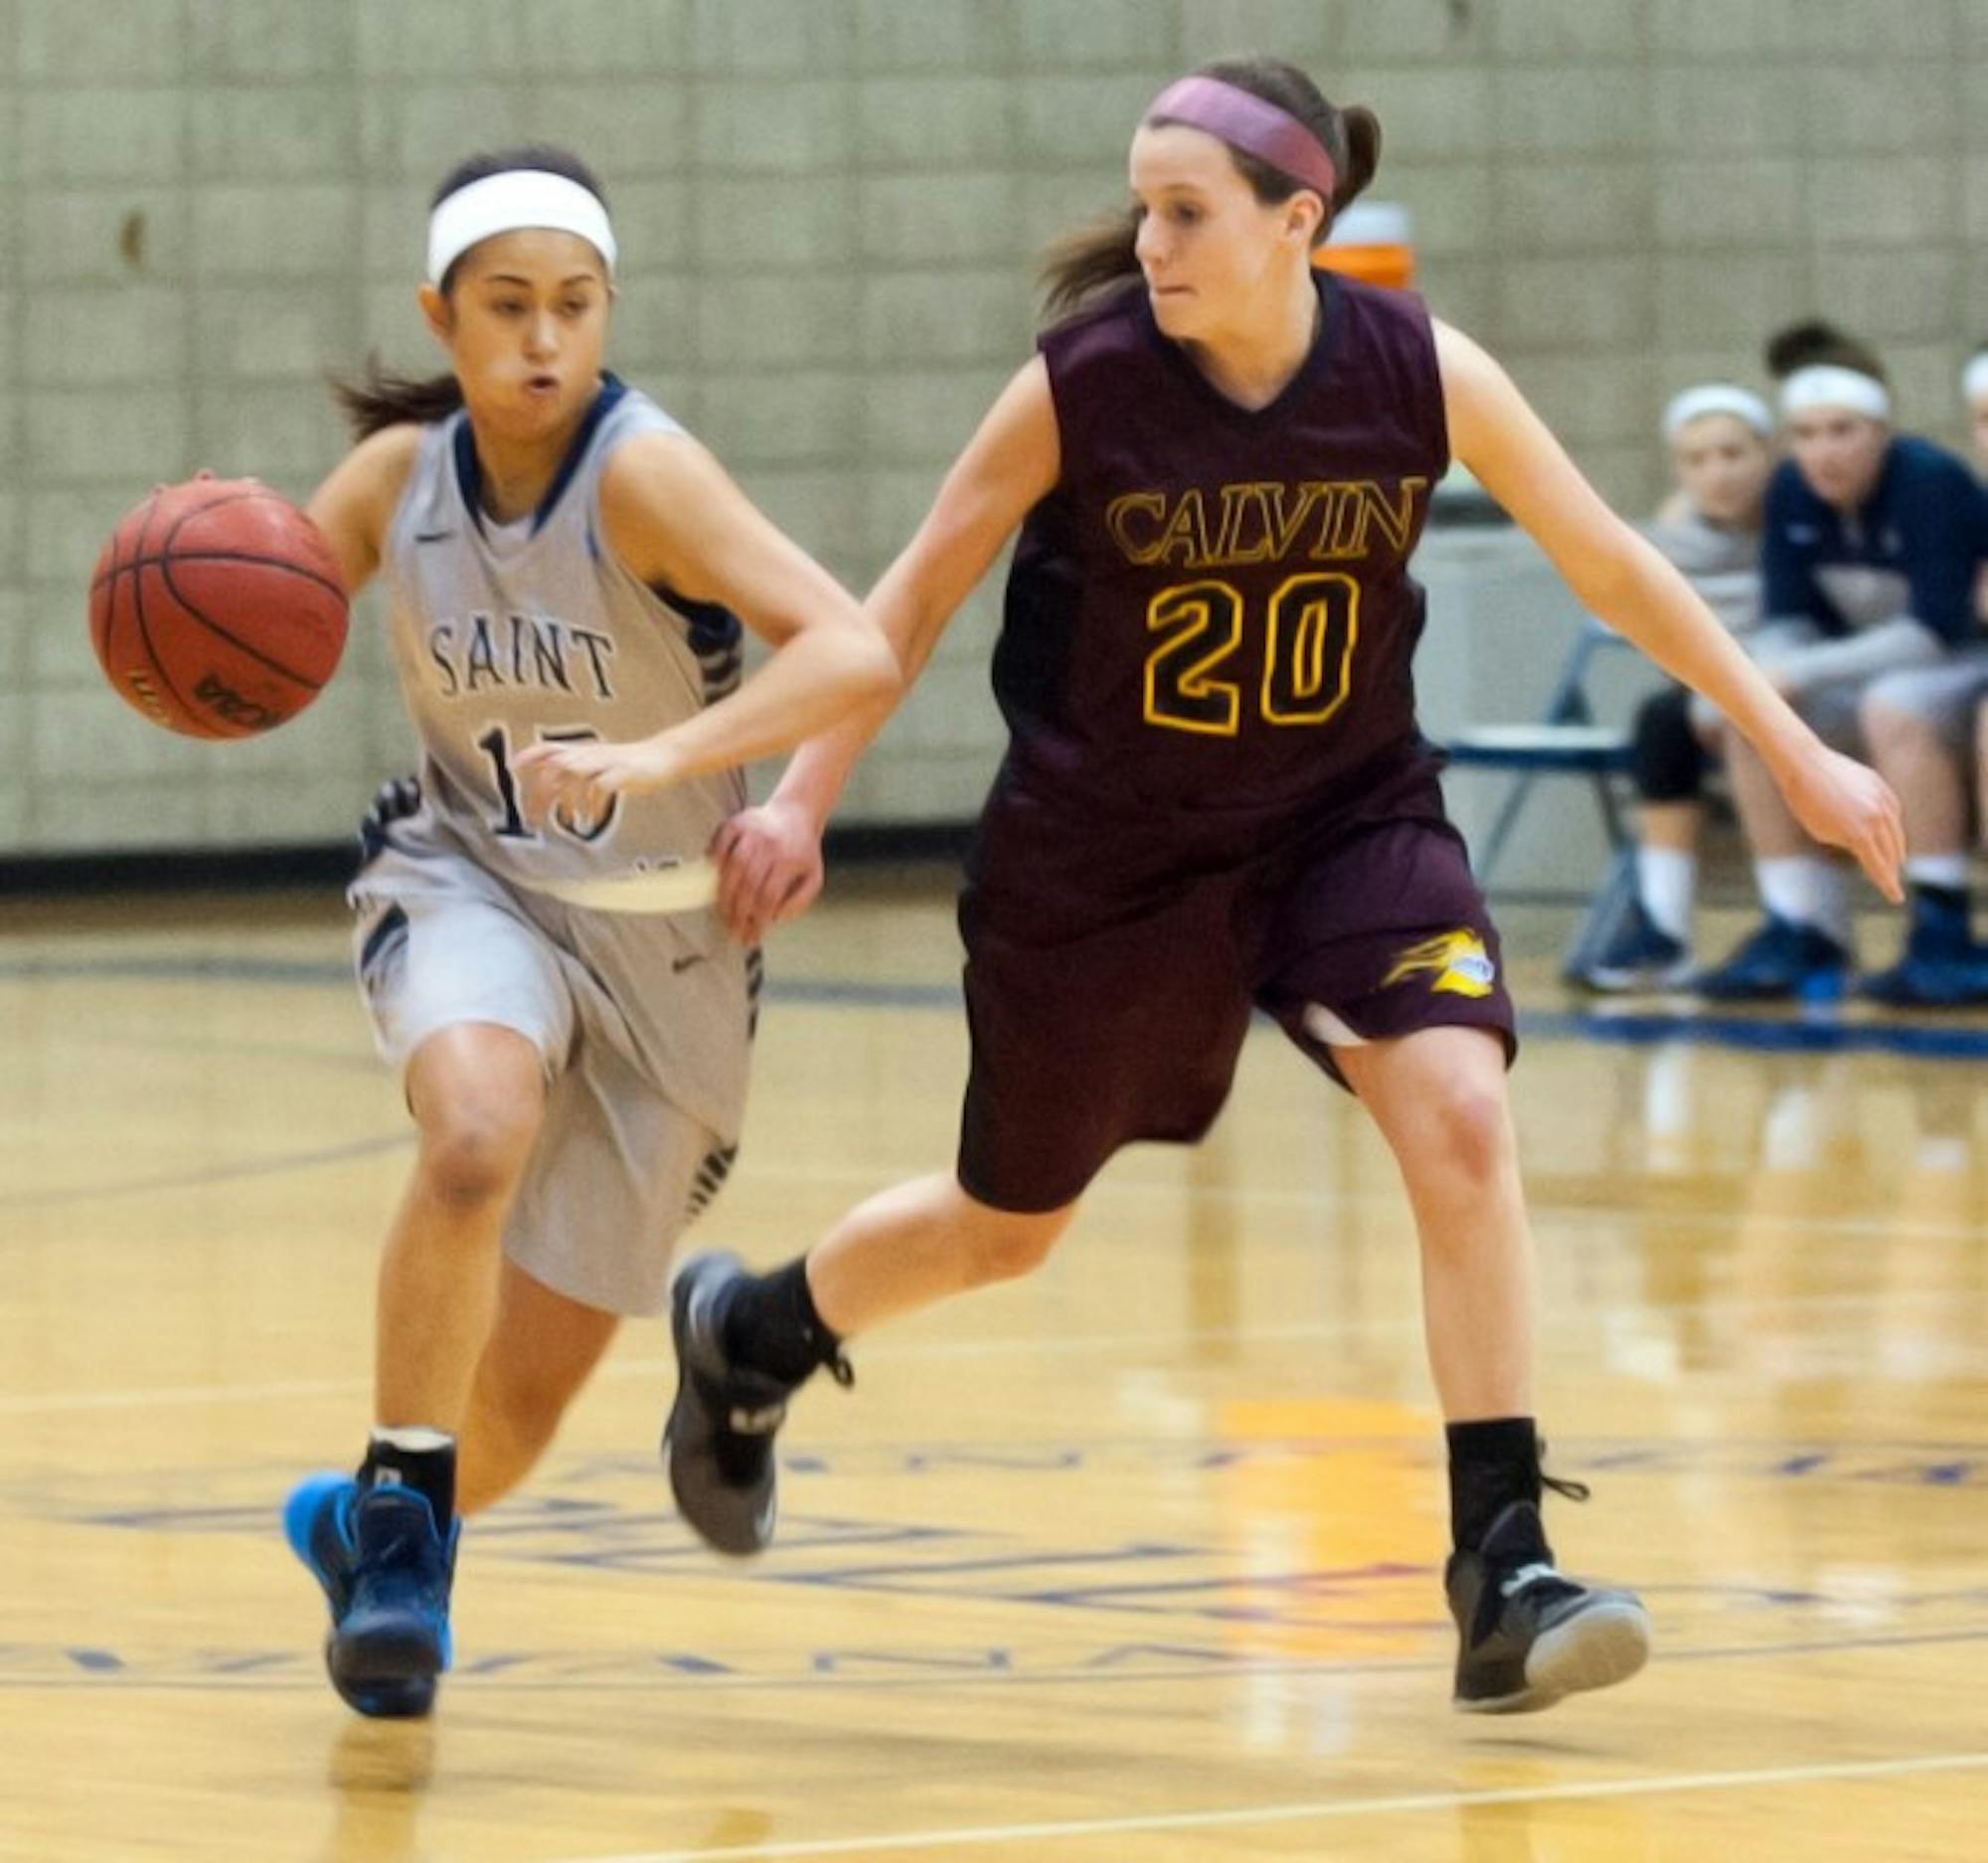 Belles sophomore guard Heather Pesigan brings the ball up the court during a 95-68 loss to Calvin on Jan. 15.